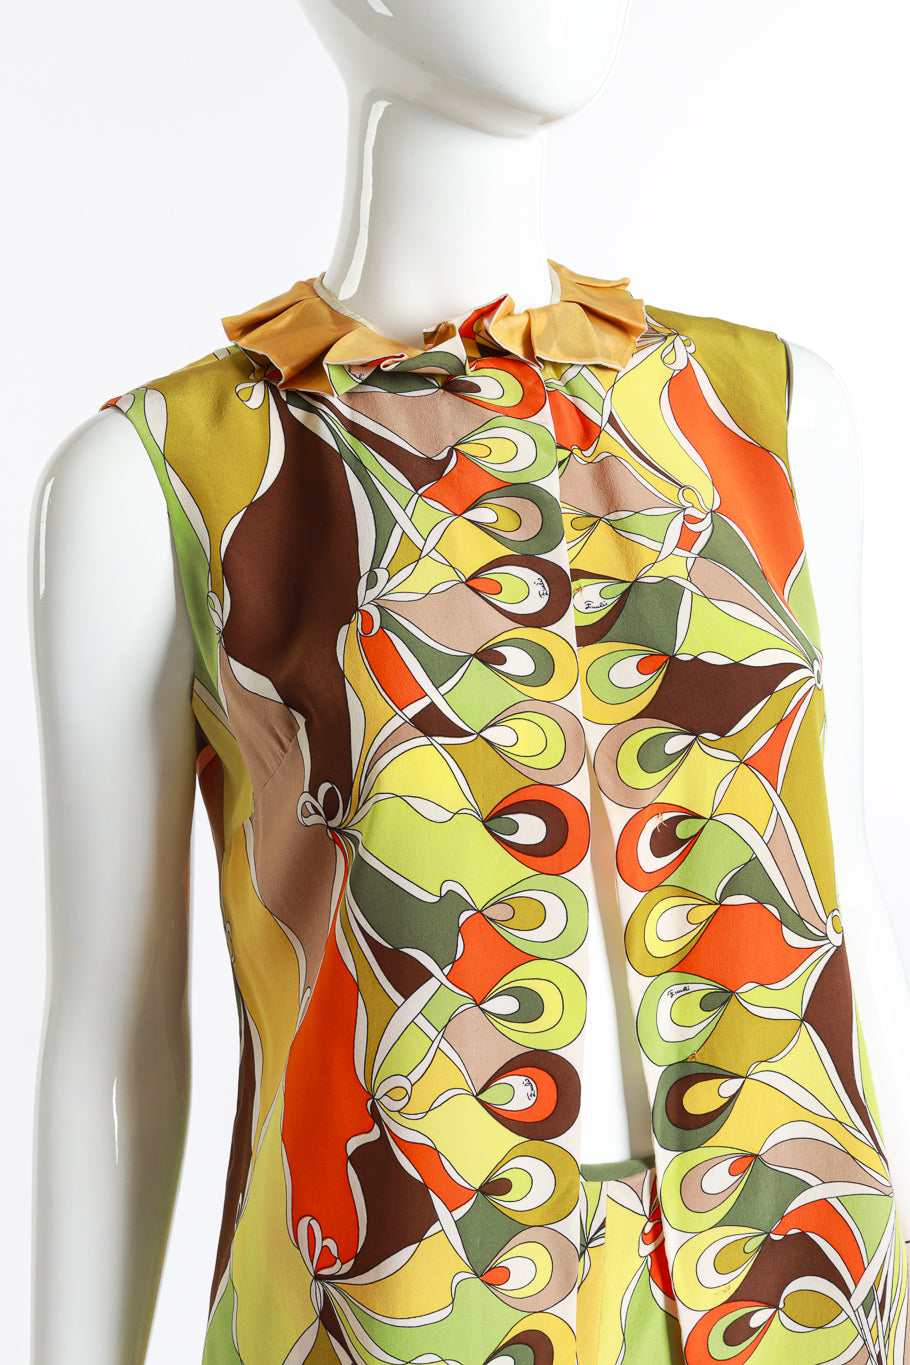 Vintage Emilio Pucci ruffle tunic high waisted trouser set close up detailed front view as seen on mannequin @RECESS LA